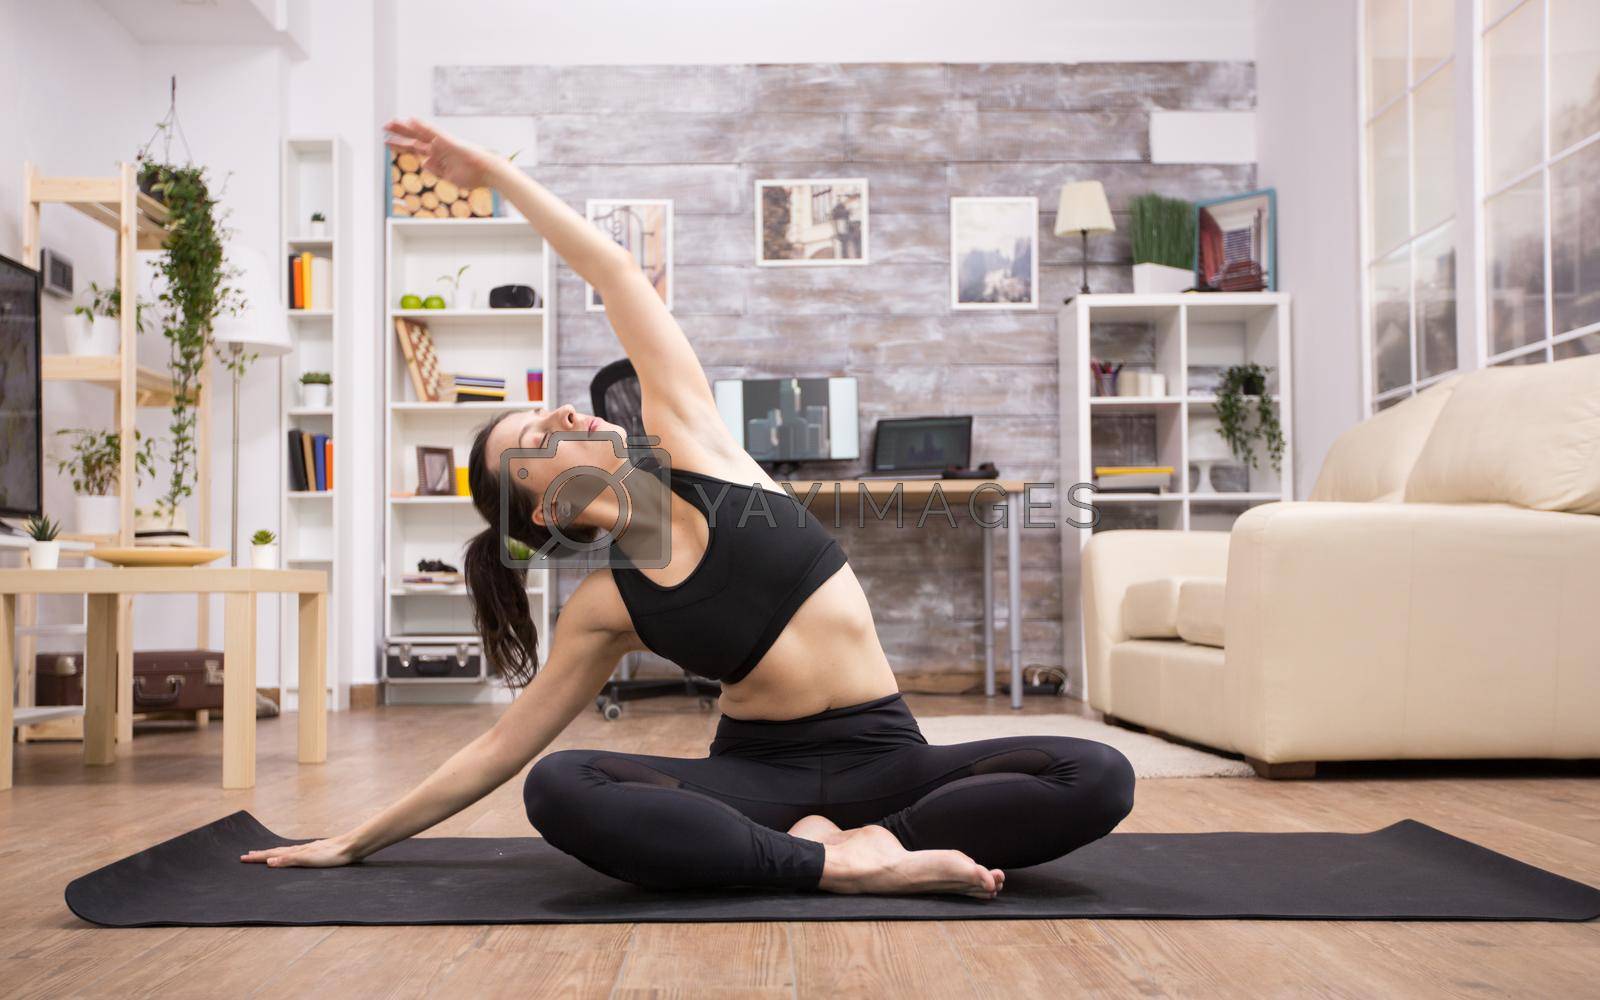 Adult woman in fitness leggings doing yoga on mat in home. Lotus yoga position.